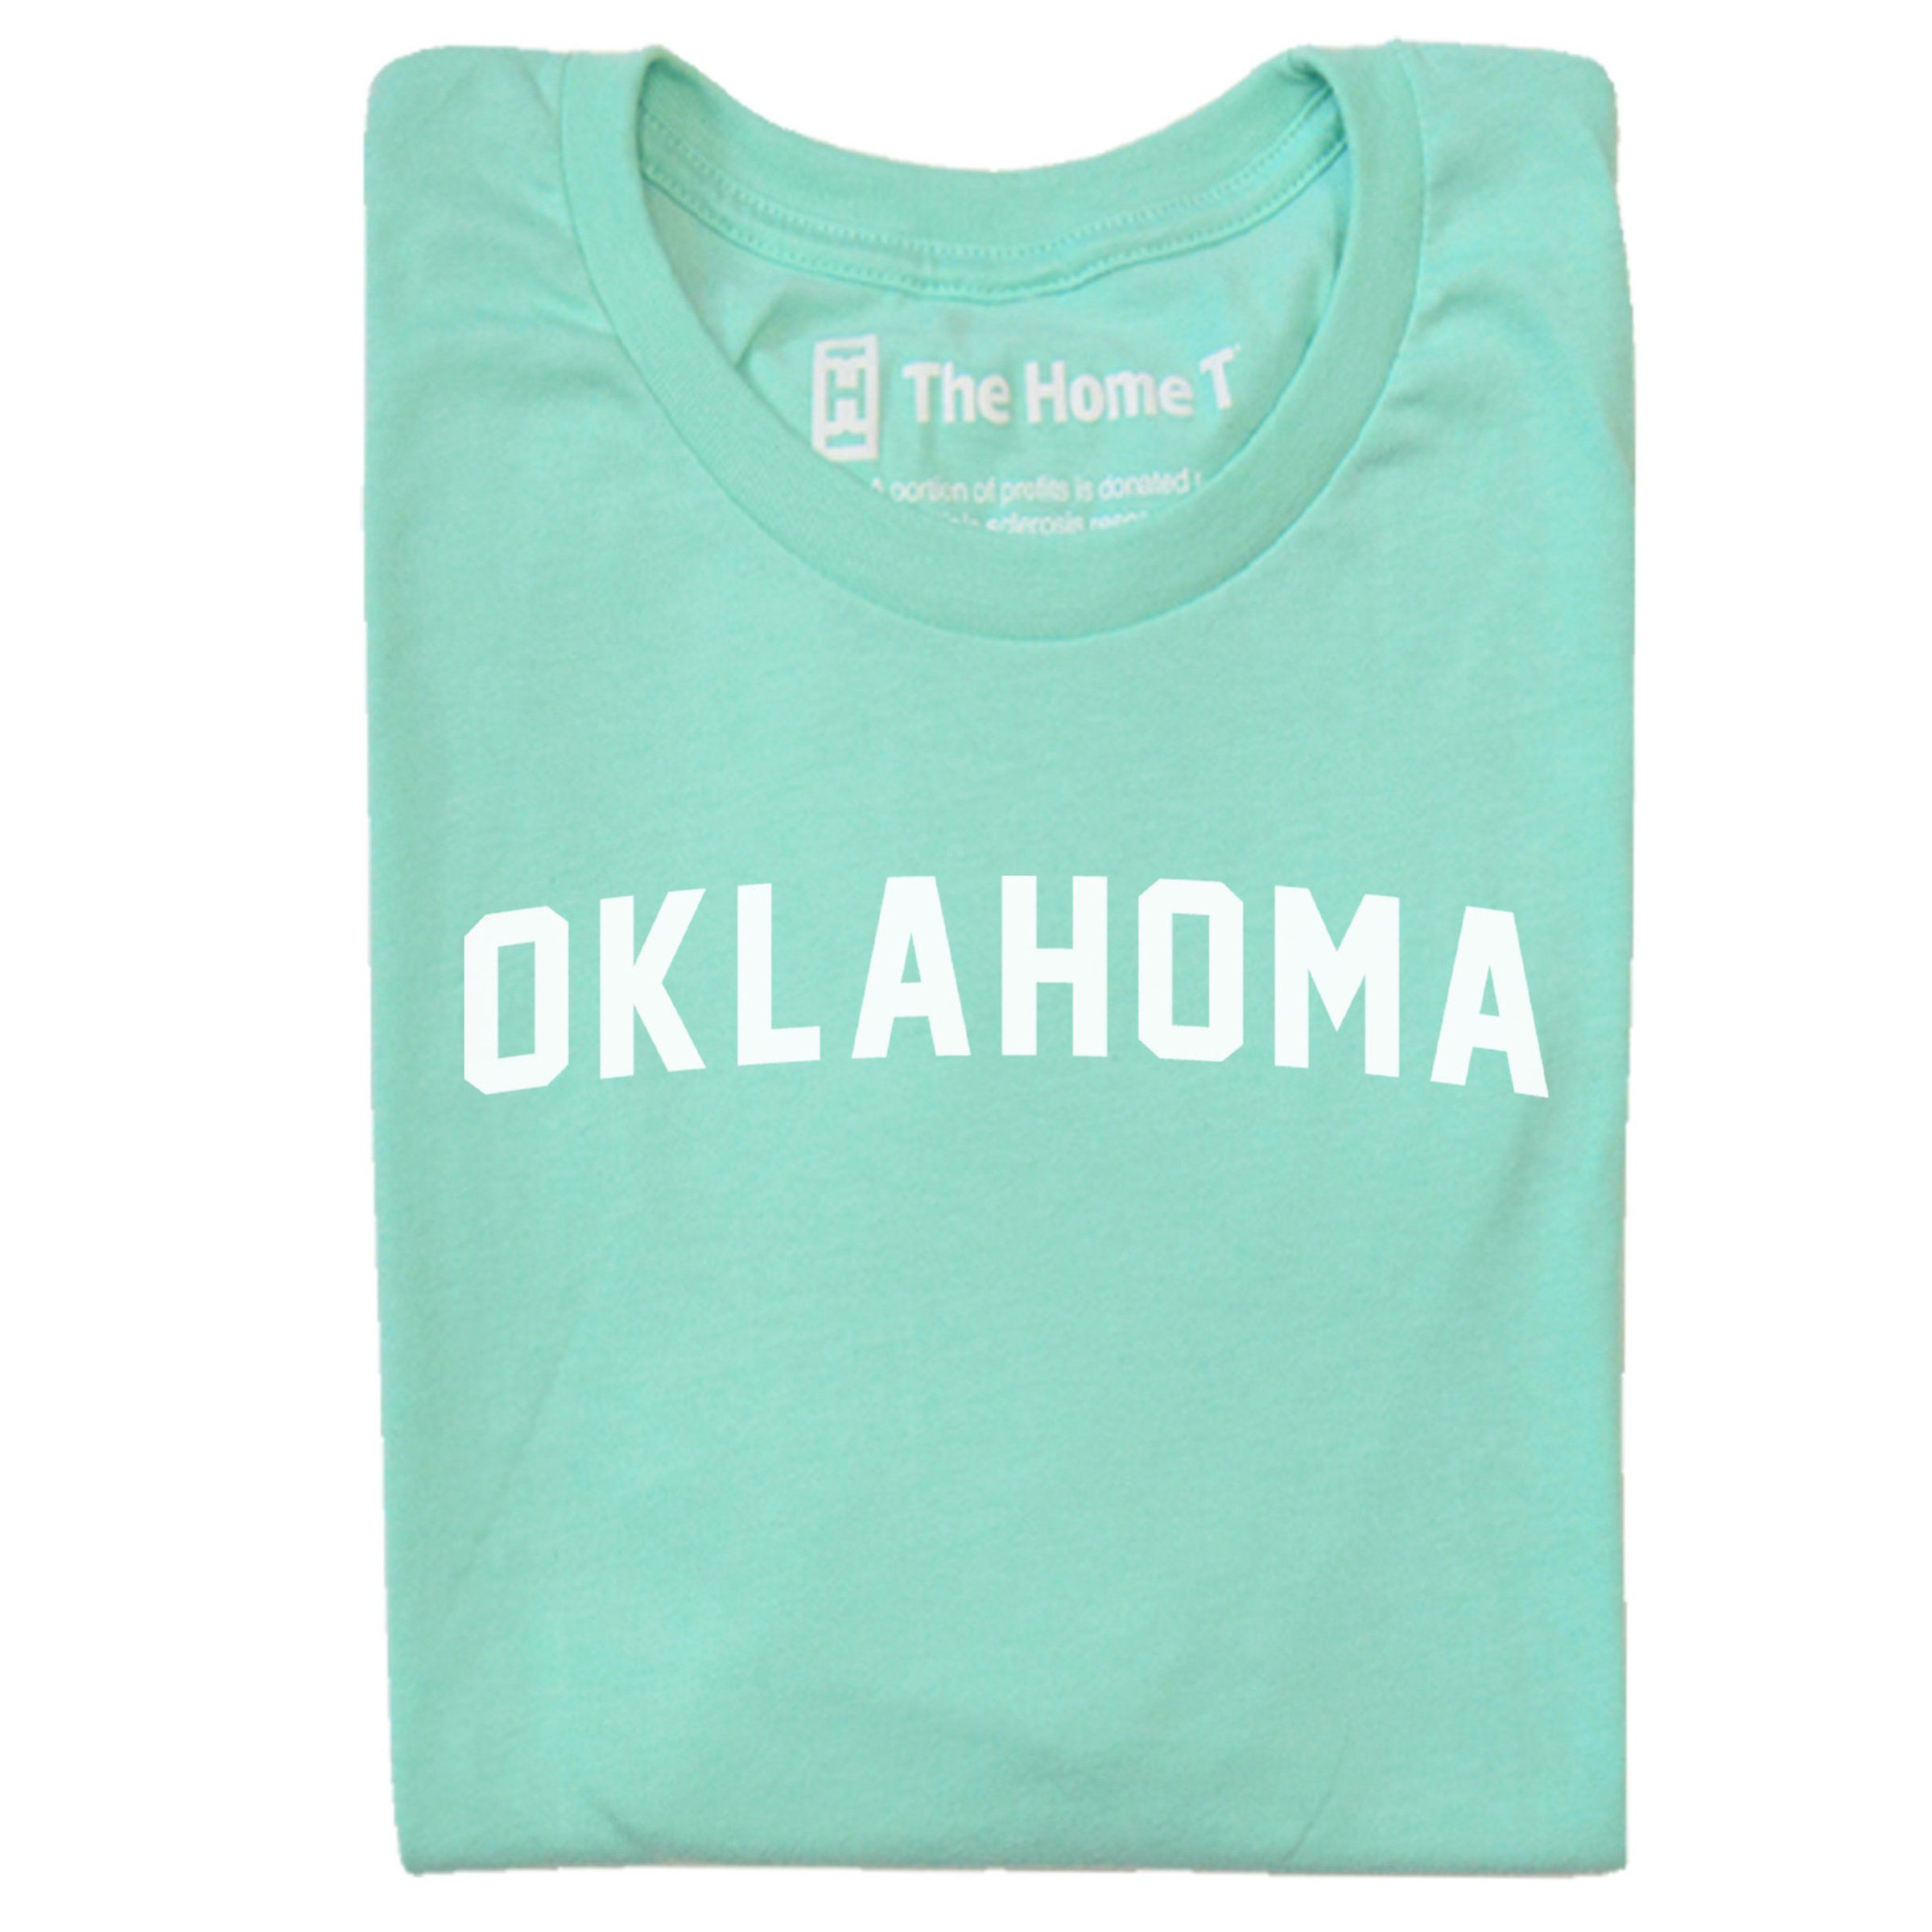 Oklahoma Arched The Home T XS Mint